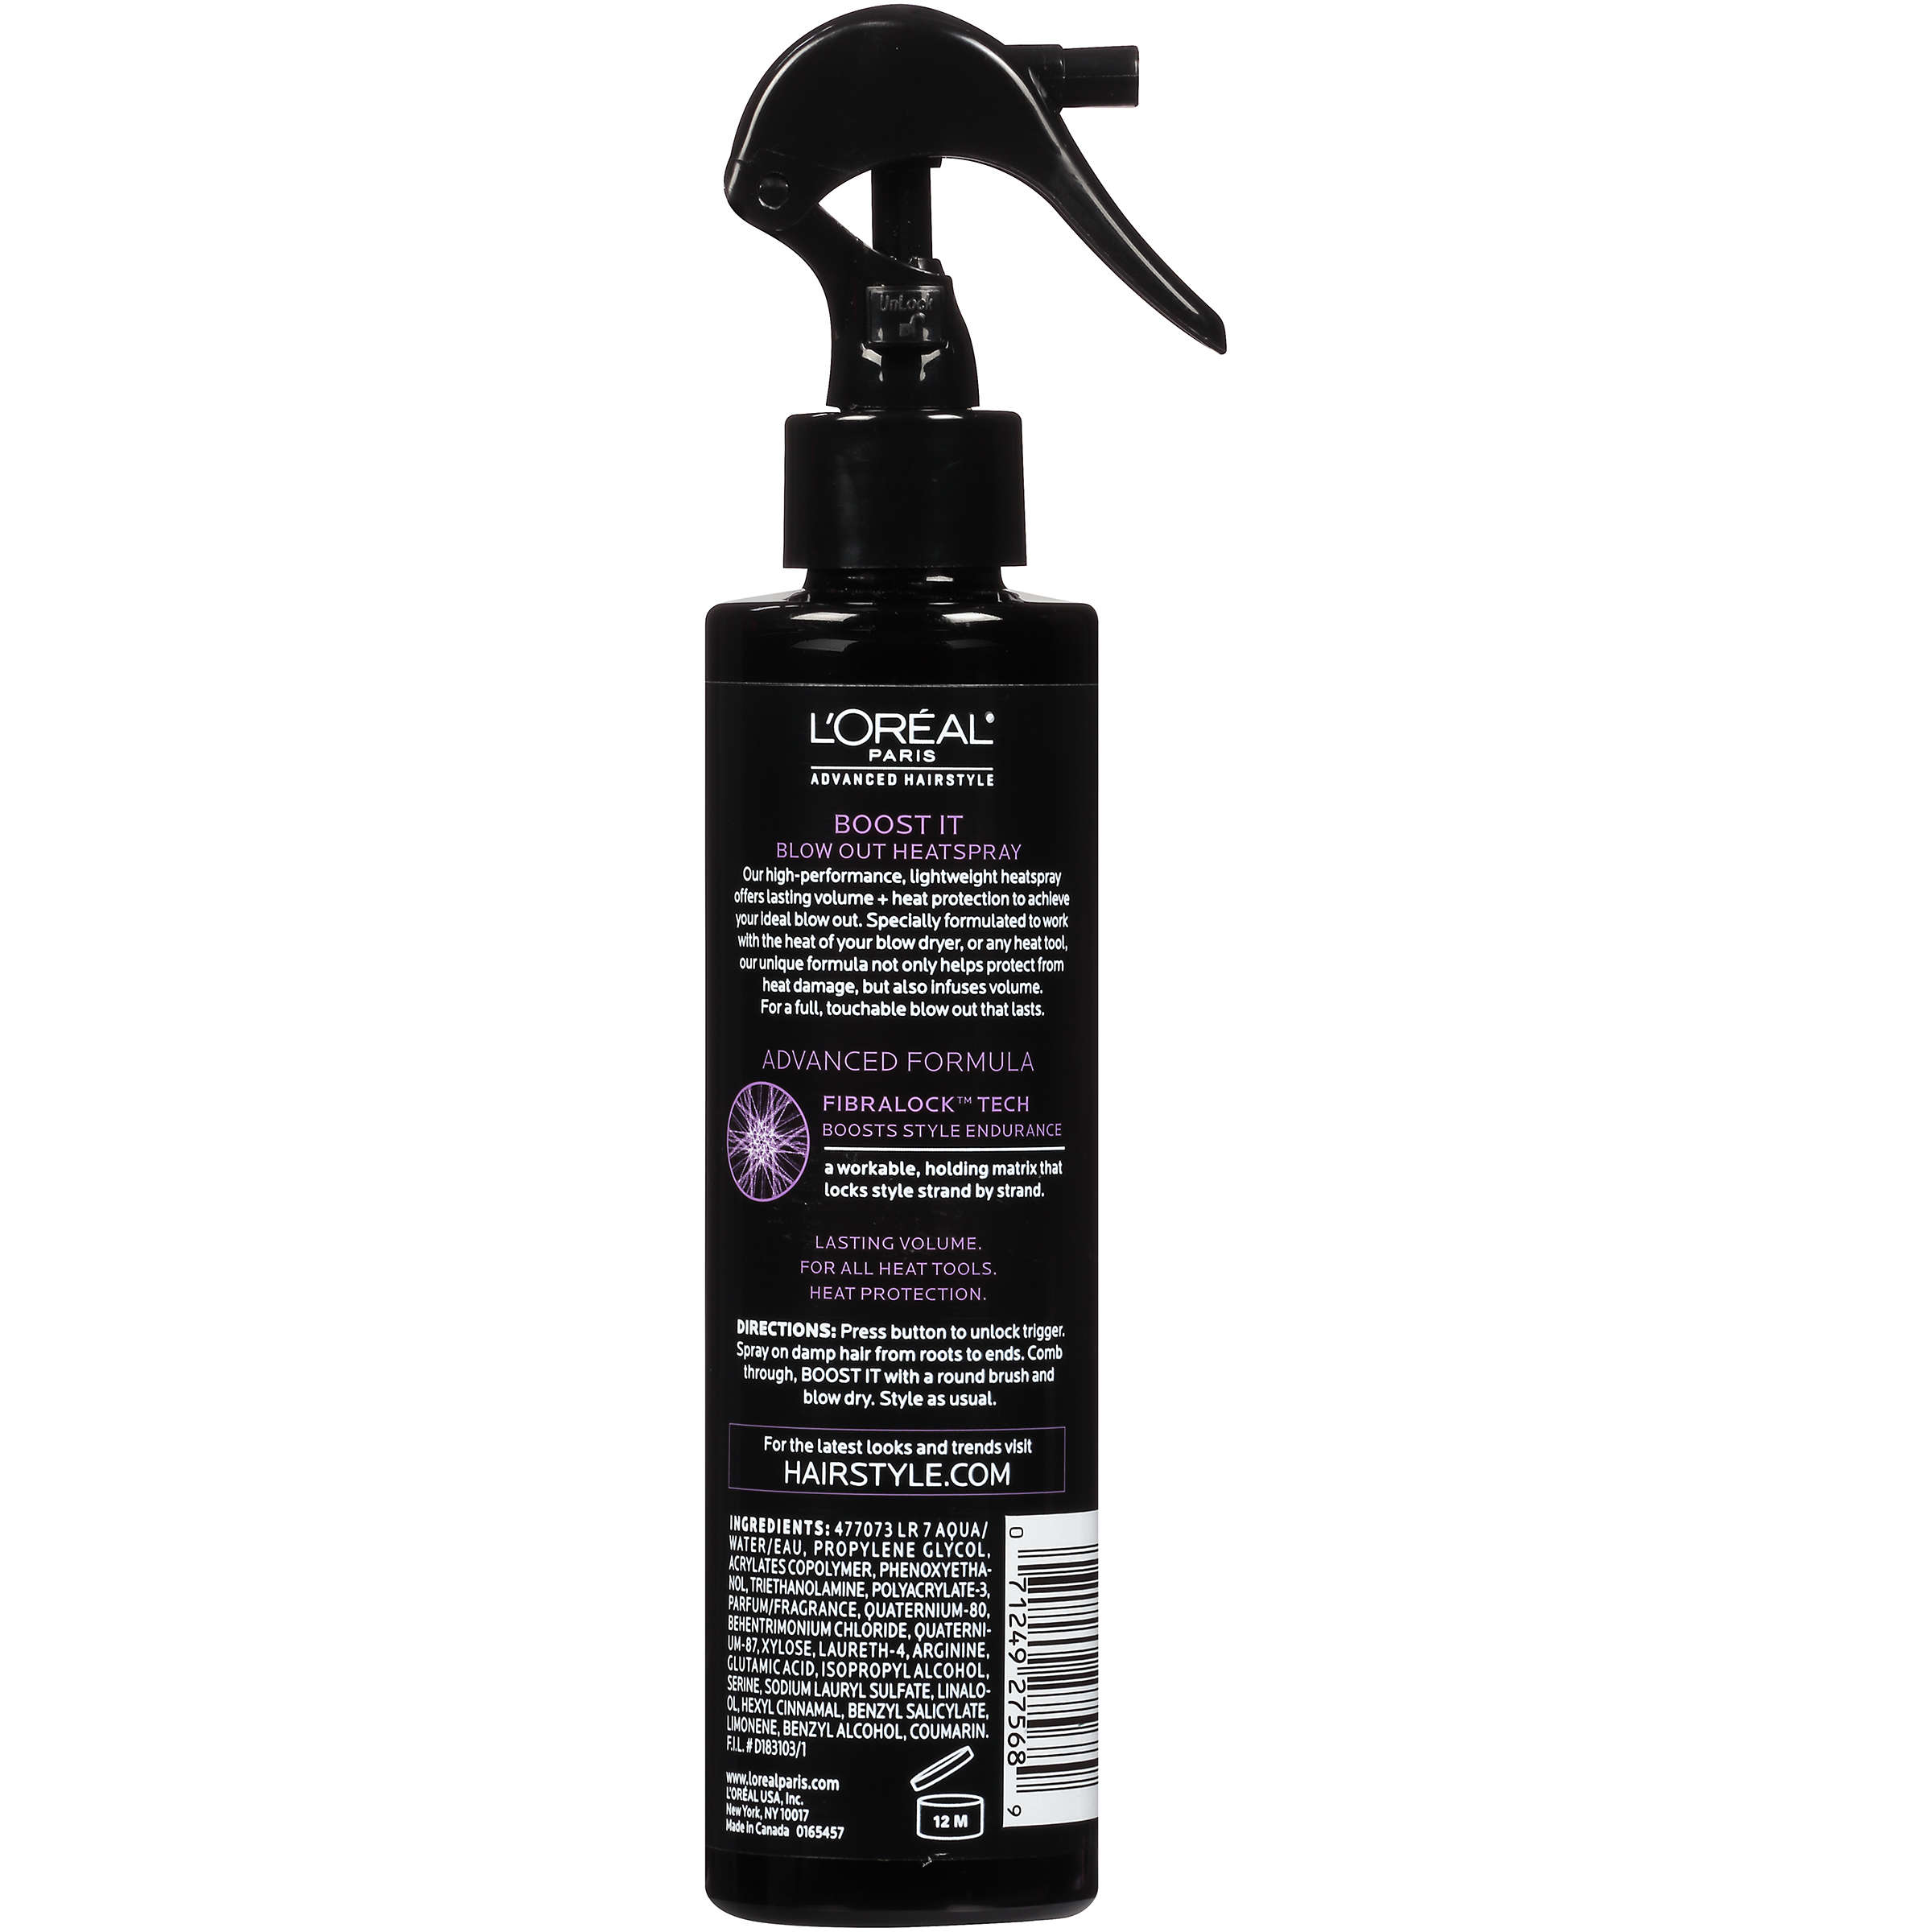 L'Oreal Paris Advanced Hairstyle BOOST IT Blow Out Heatspray 5.7 FL OZ - image 3 of 3